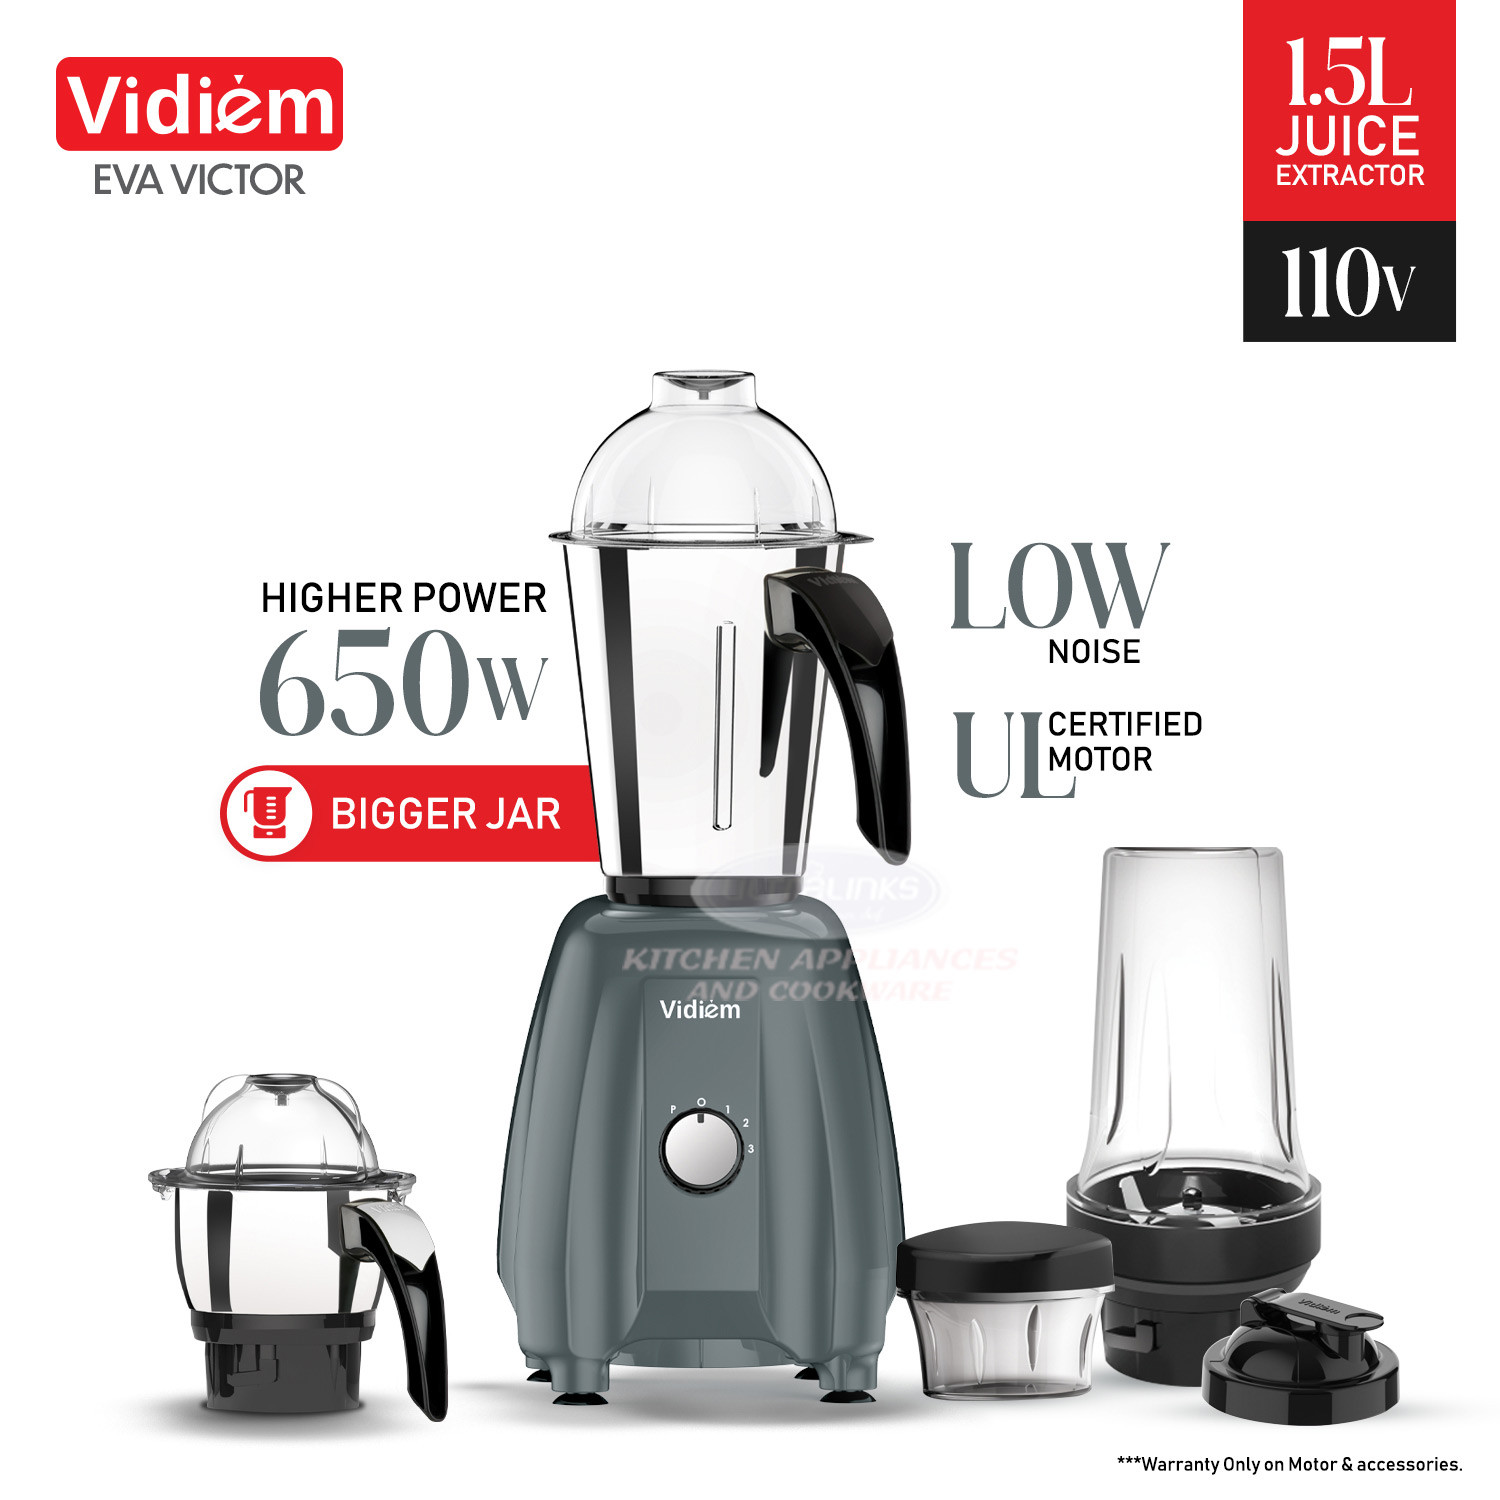 vidiem-eva-victor-pro-650w-110v-indian-mixer-grinder-ss-jars-250ml-spice-personal-coffee-herbs-grinder-with-500ml-personal-juices-shakes-smoothie-blender-made-for-canada-usa2